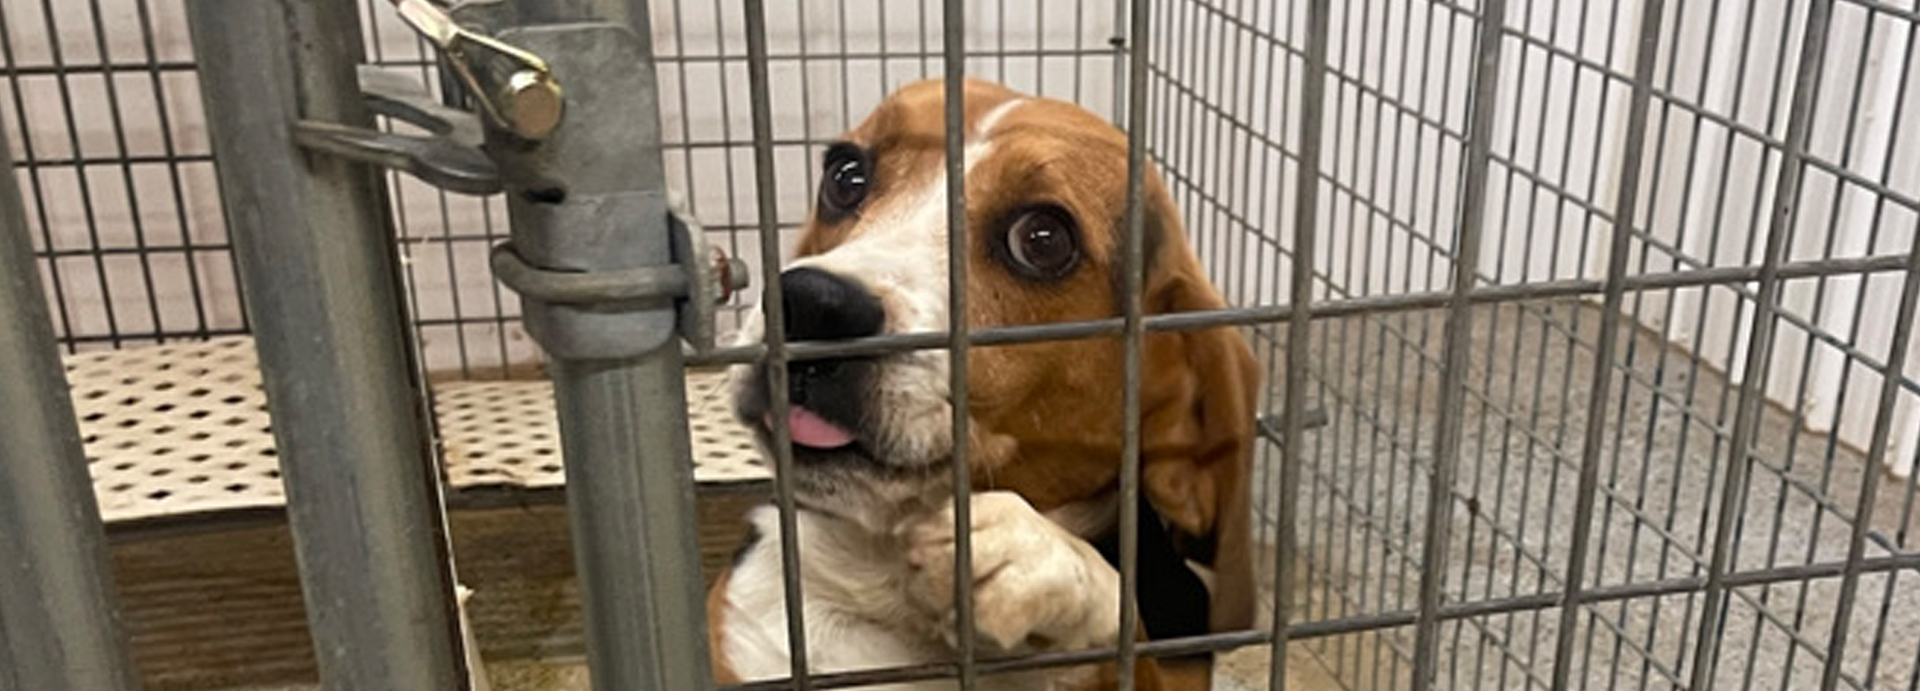 Beagle Freedom Project rescues 200 animals from Oklahoma testing facility